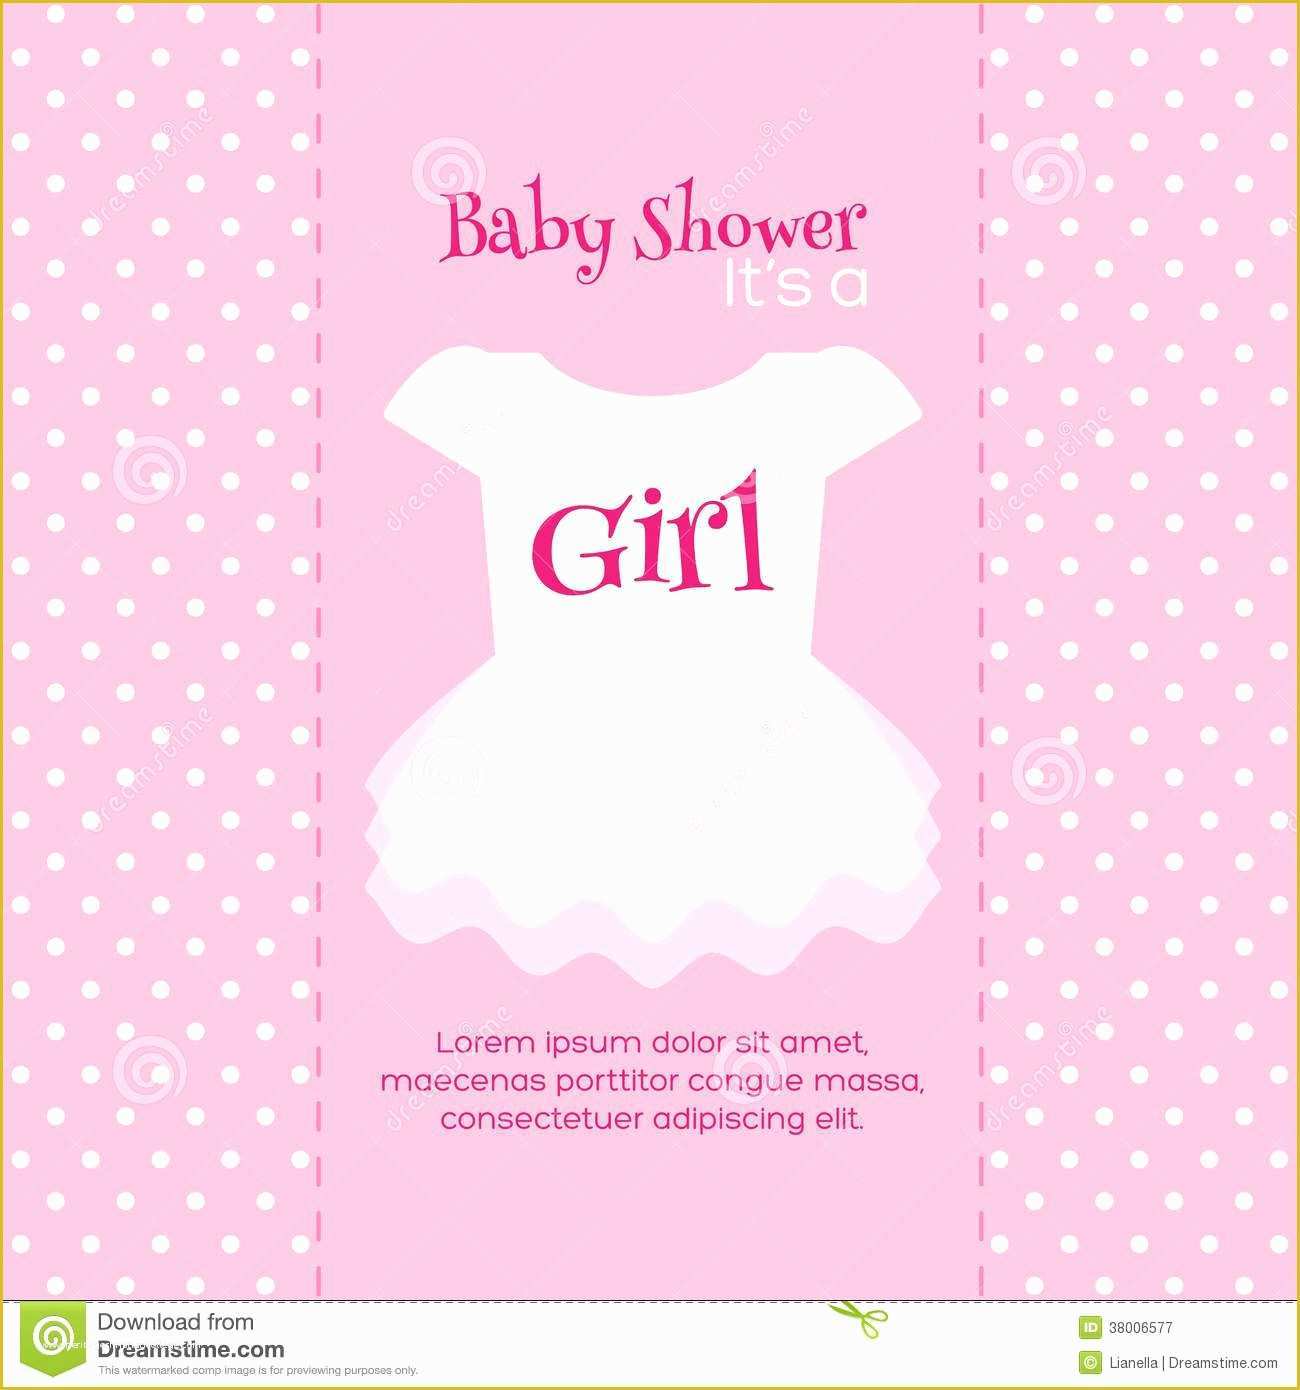 Free Online Baby Shower Invitations Templates Of Baby Shower Invitations Cards Designs Free Baby Shower